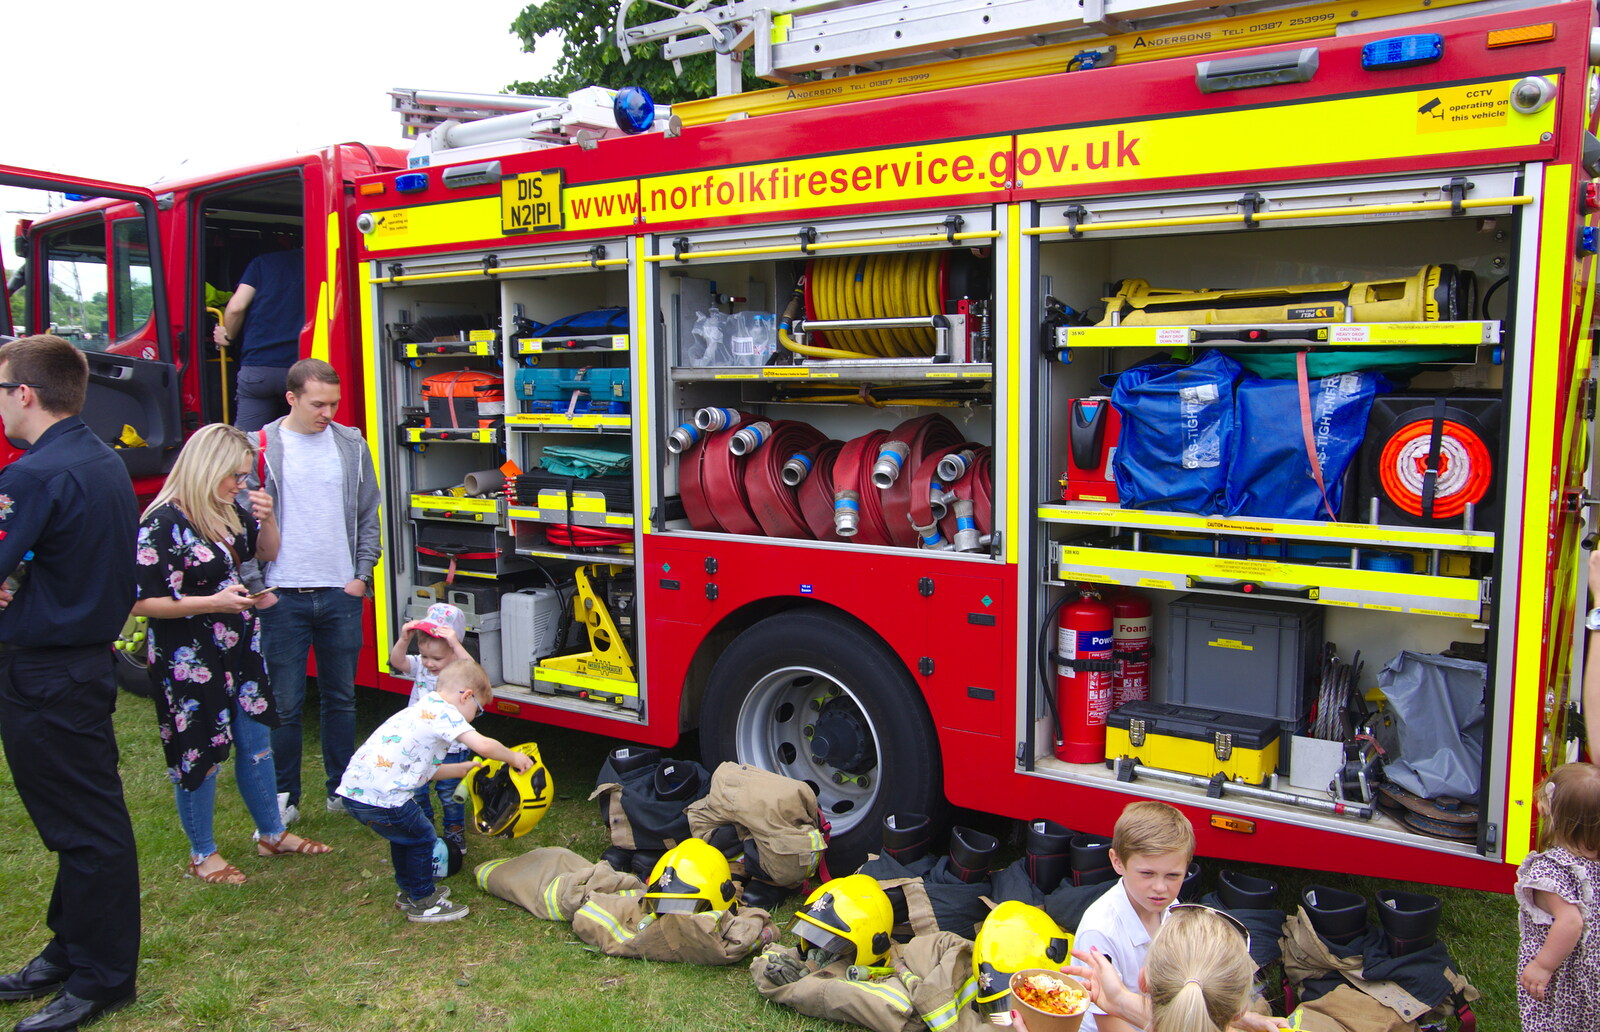 Fire engine kit from The Diss Carnival 2019, Diss, Norfolk - 9th June 2019